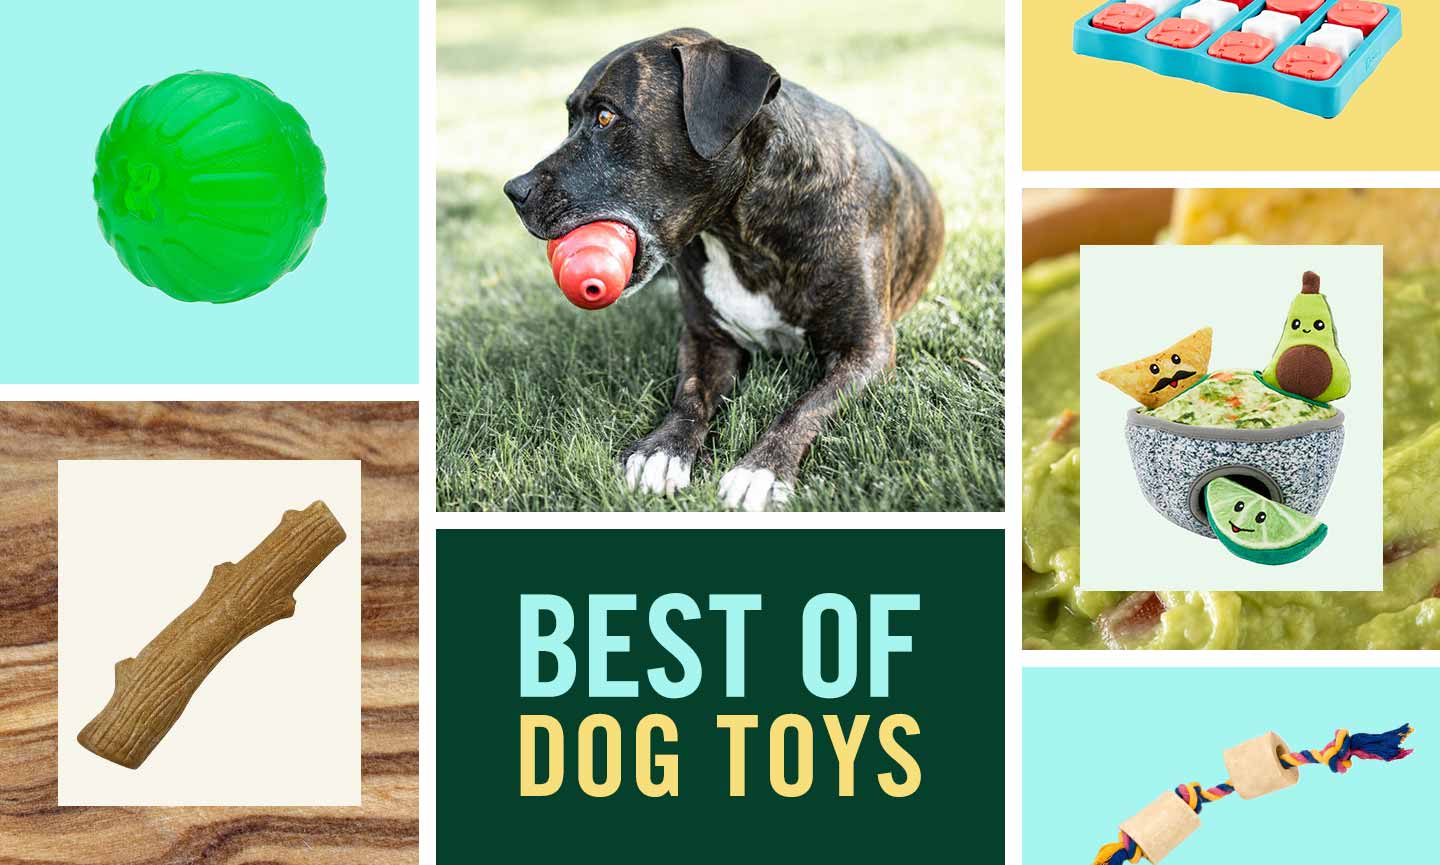 https://media-be.chewy.com/wp-content/uploads/2021/10/23164942/best-dog-toys-1.jpg